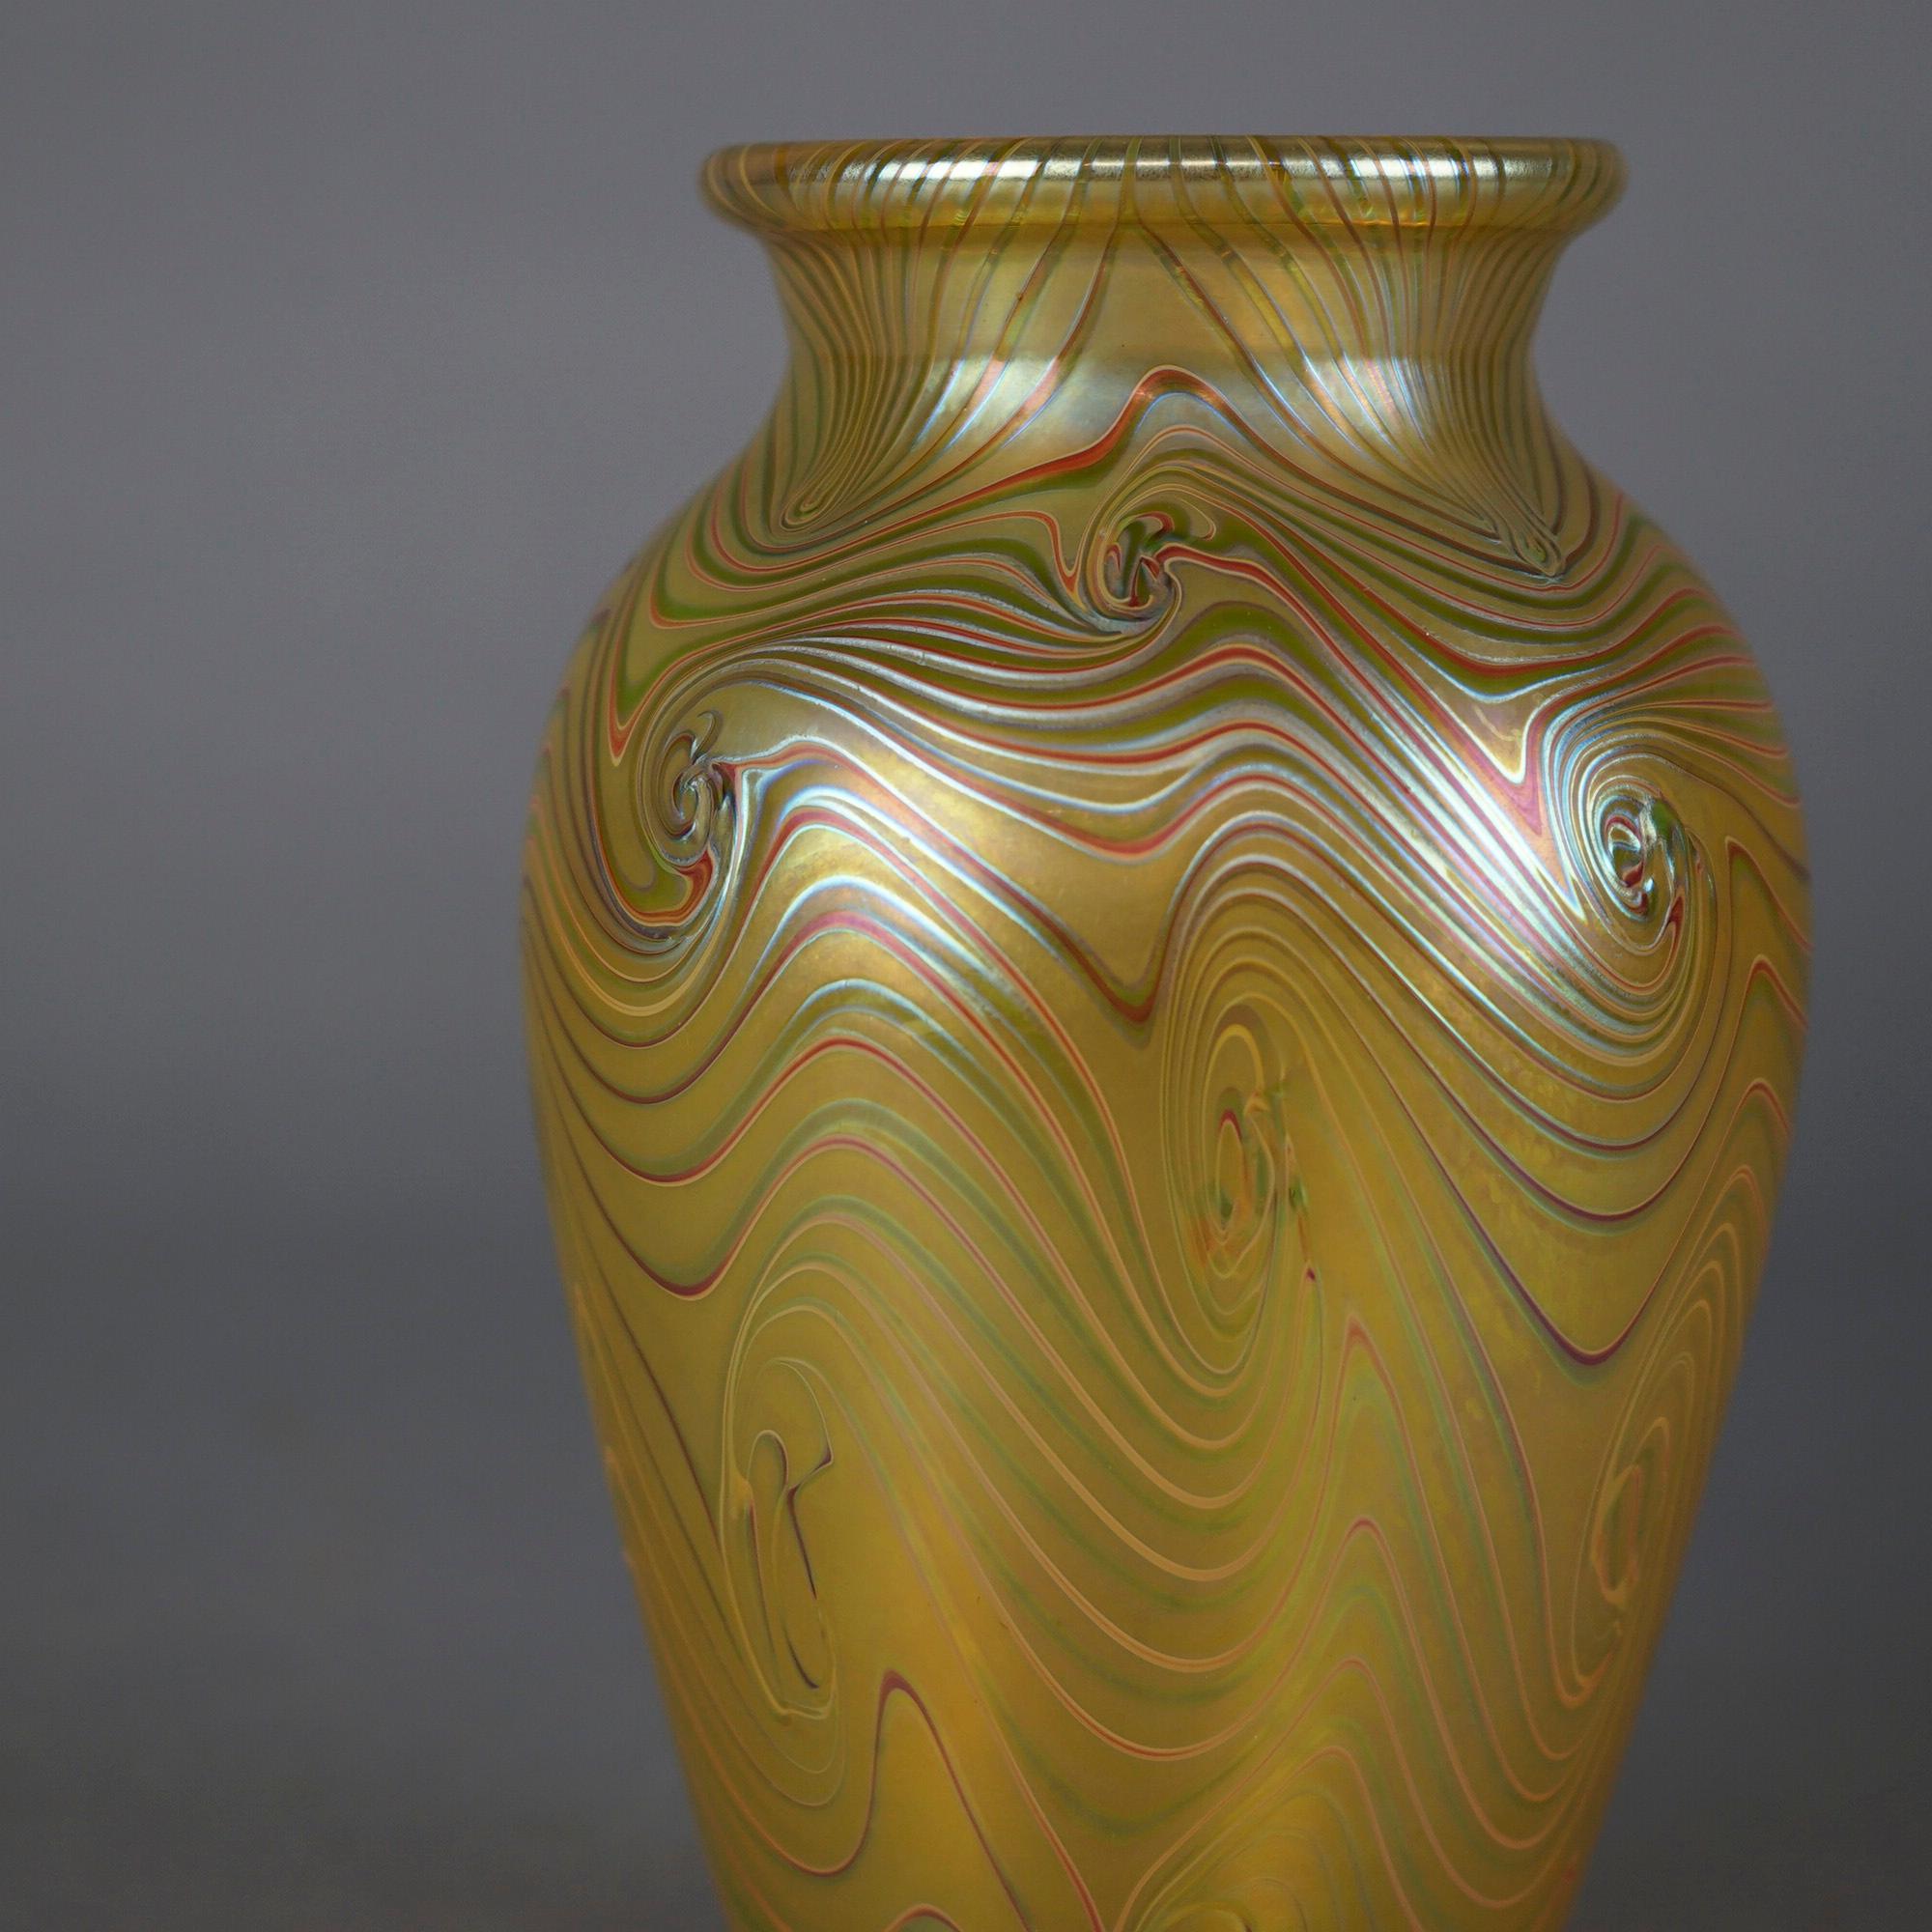 20th Century Artisan Crafted Orient & Flume Gold & Chocolate Art Glass Vase, Signed, 20th C